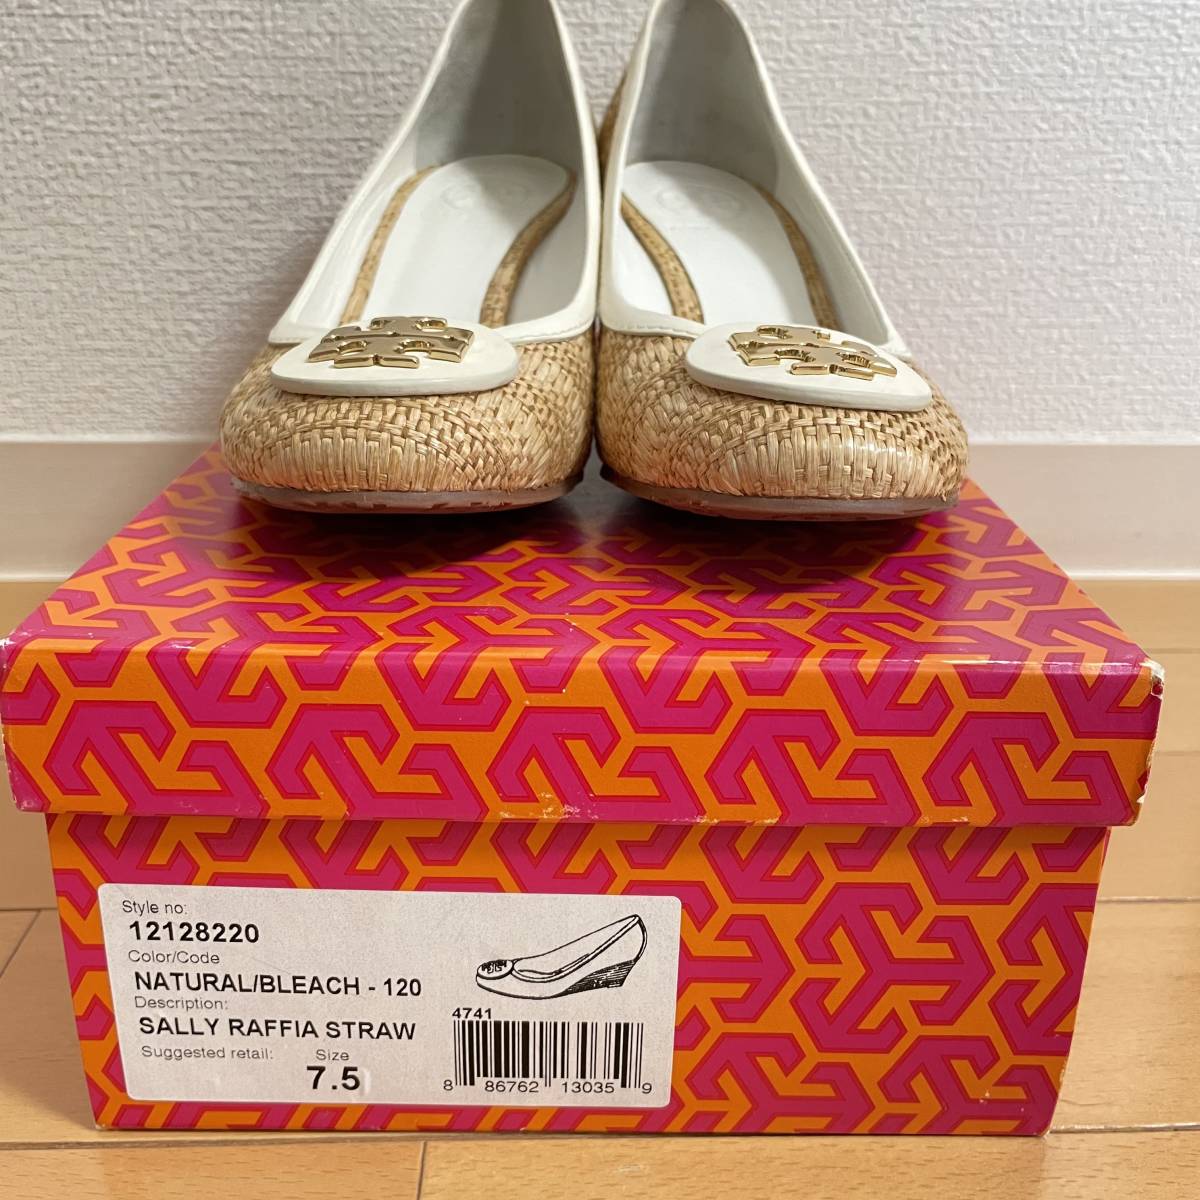 TORY BURCH トリーバーチ【美品】パンプス size:7.5 product details 